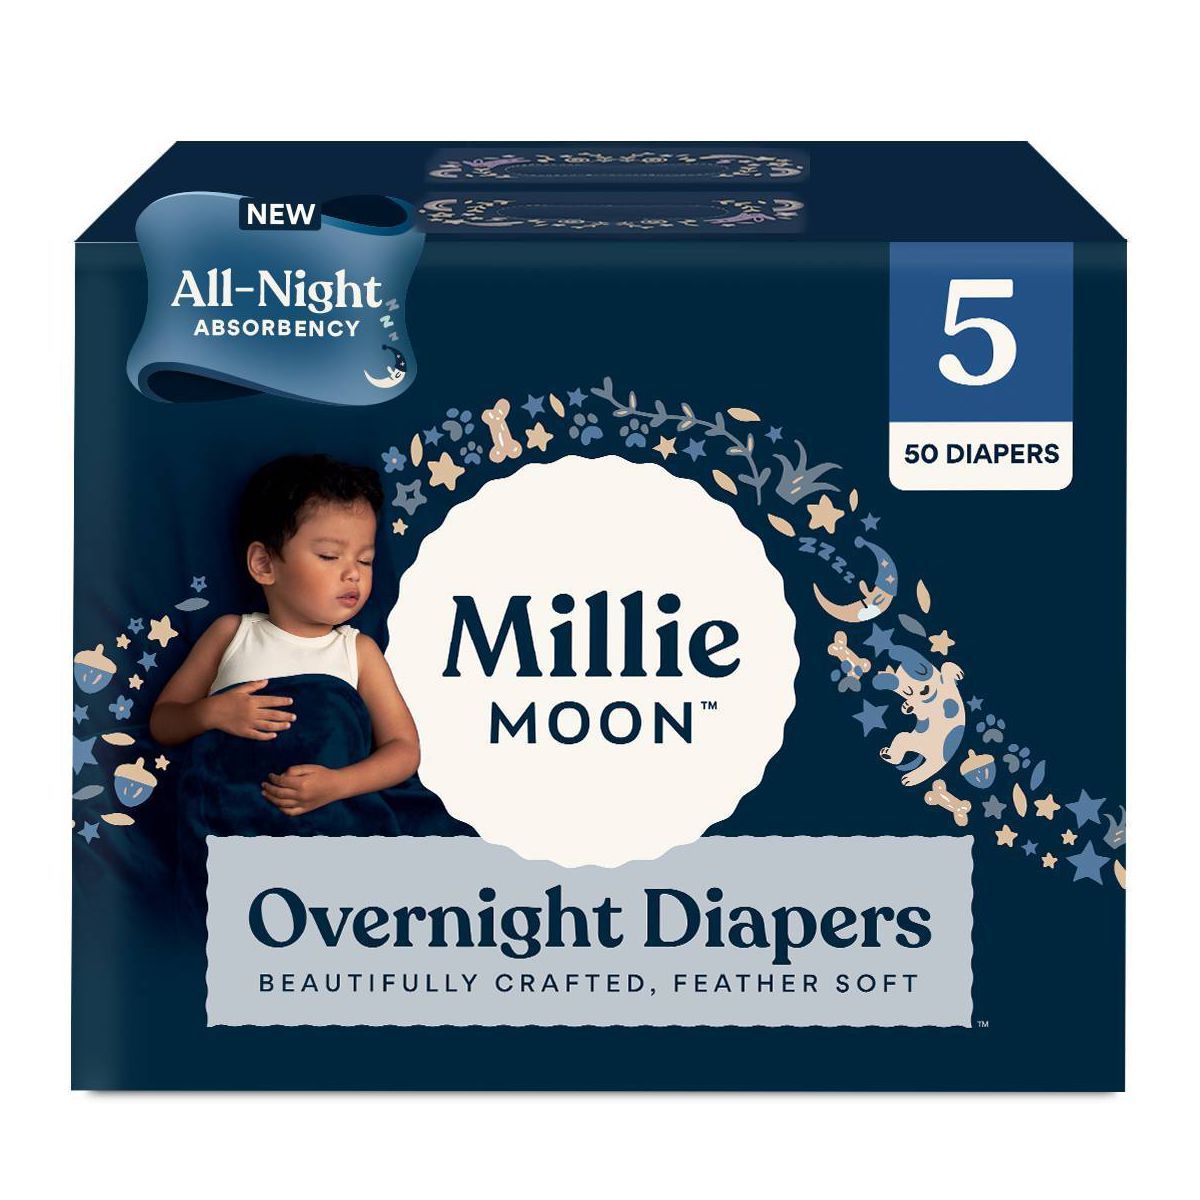 Millie Moon Disposable Overnight Diapers | Target